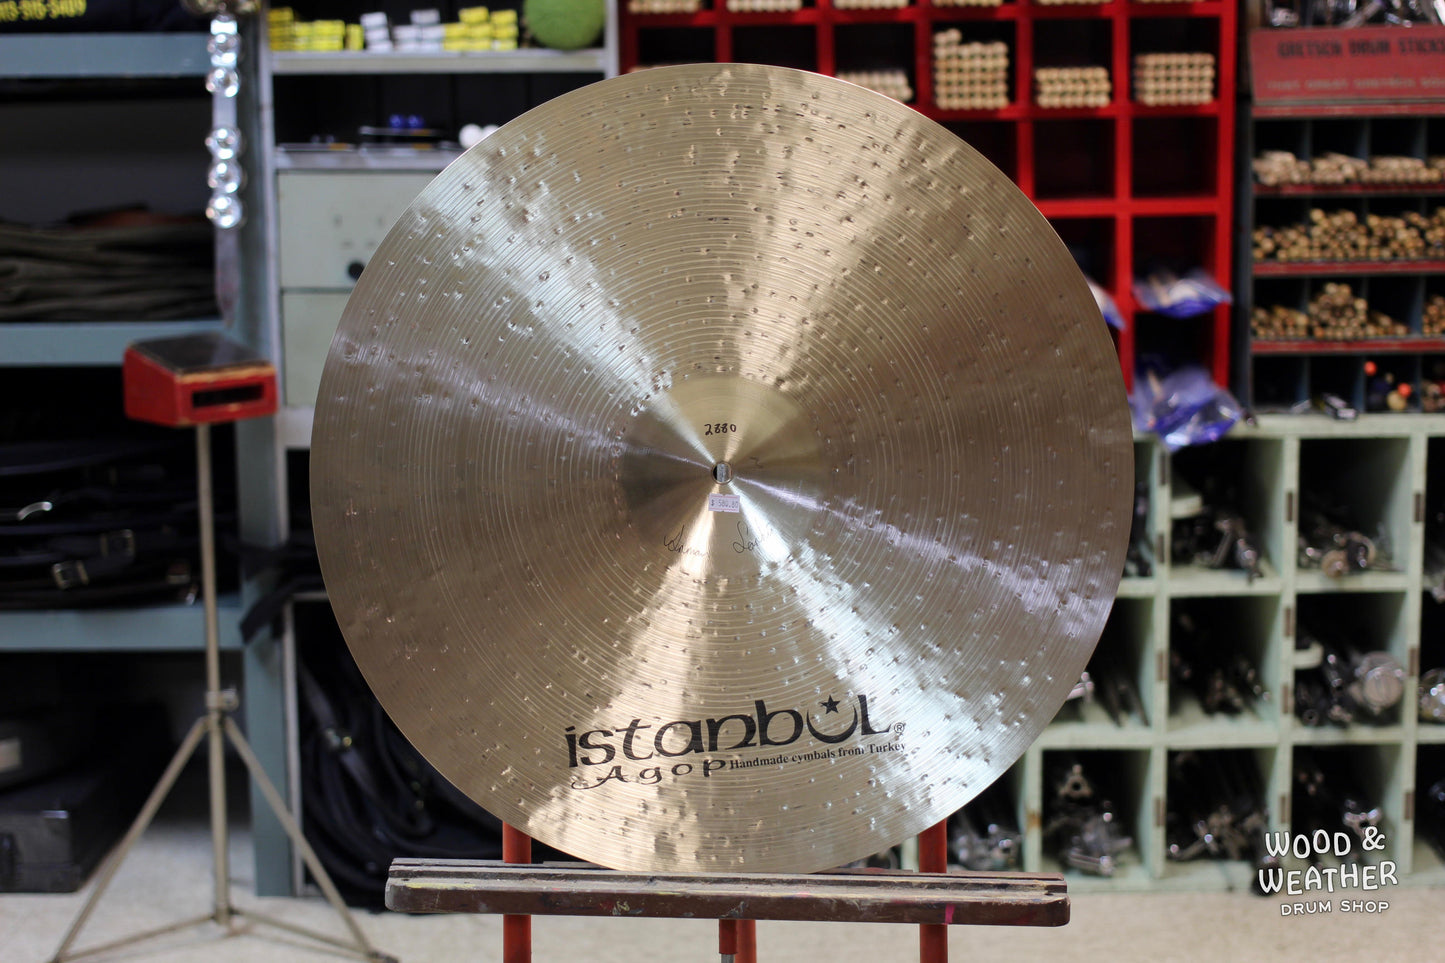 Istanbul Agop 22" Mantra Series Ride Cymbal 2880g